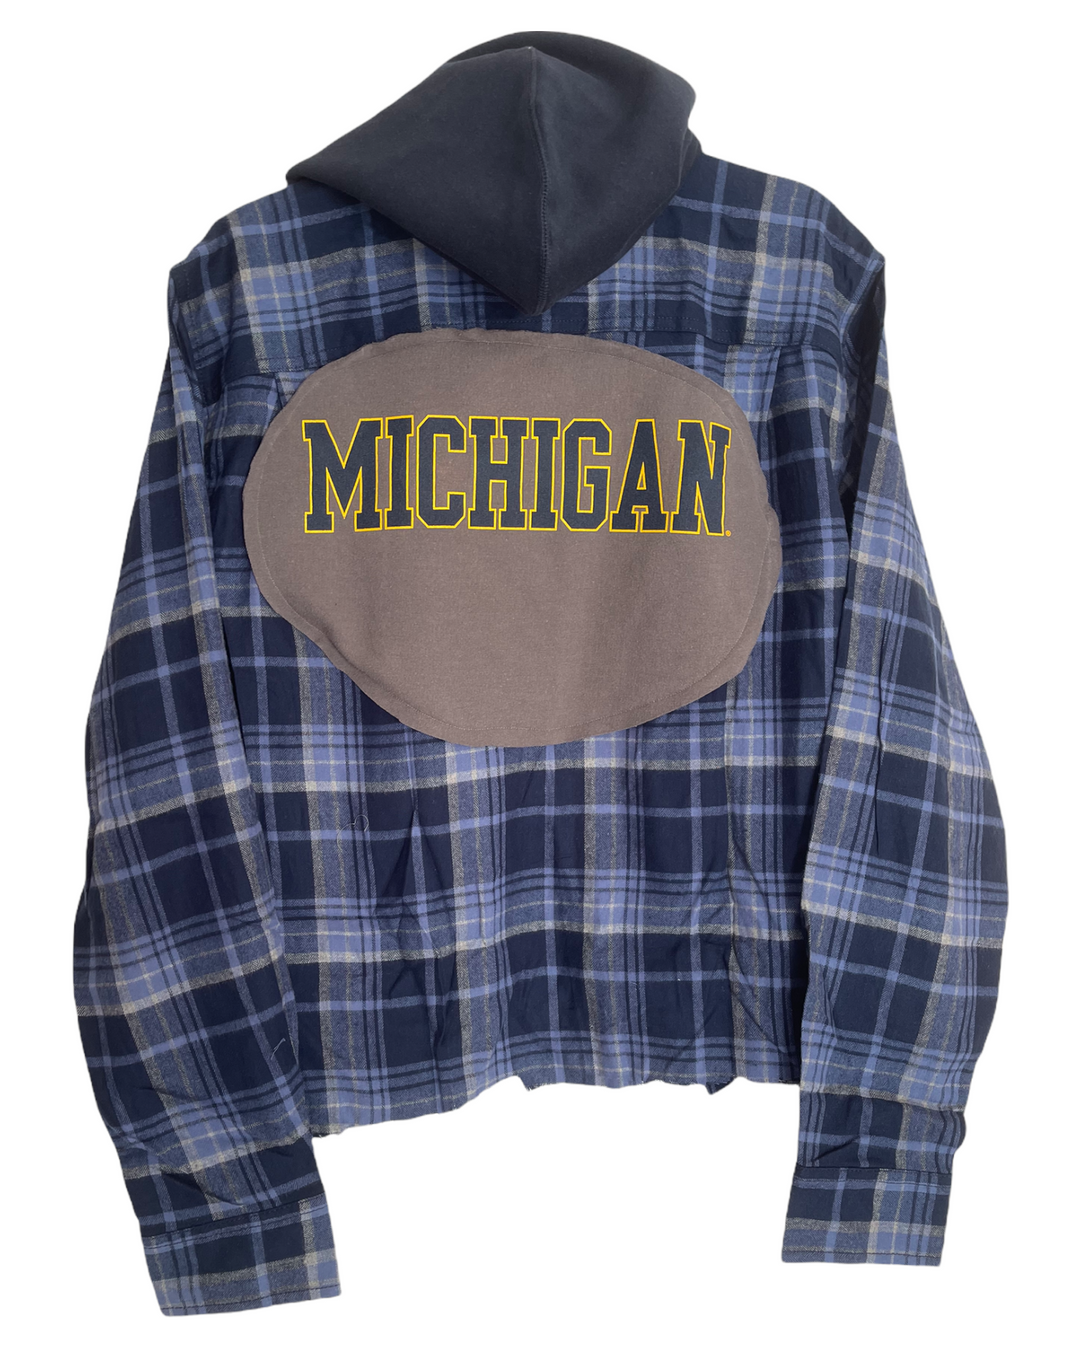 Michigan Patched Flacket